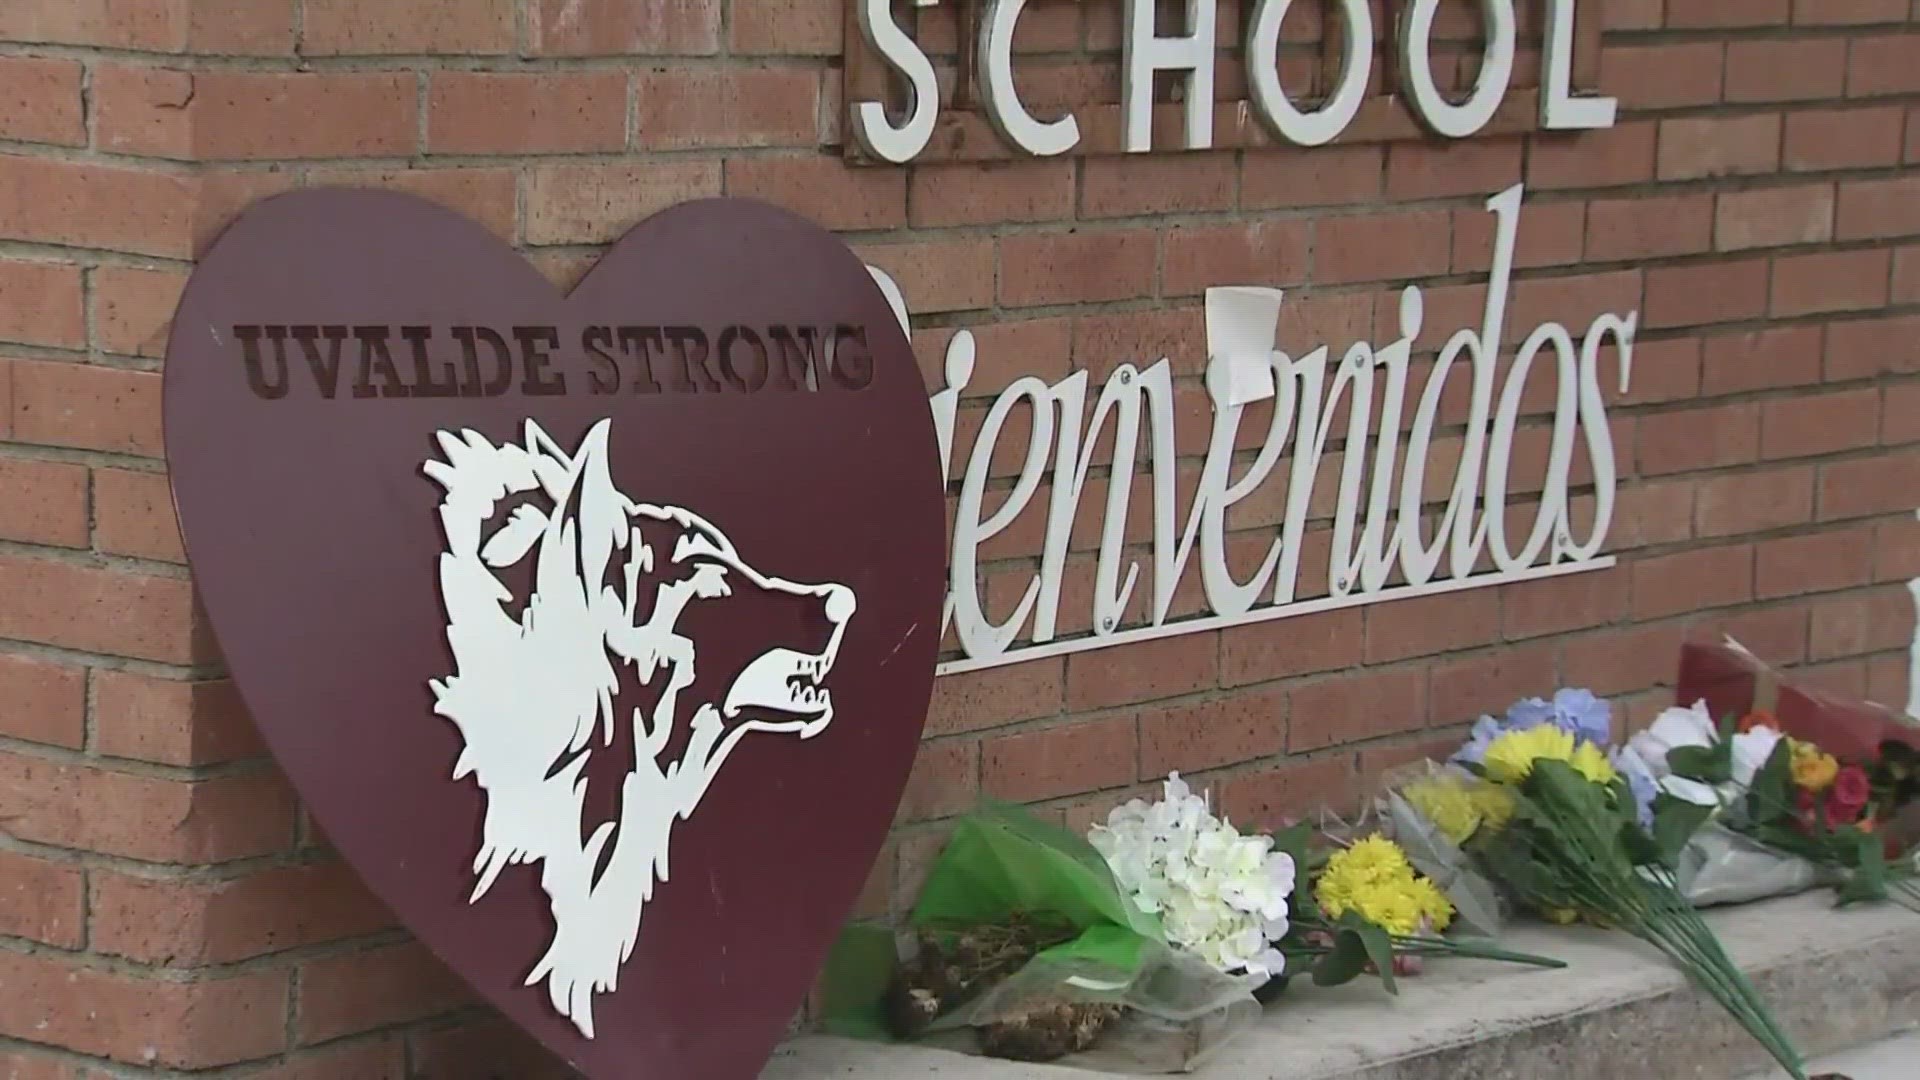 It's been one year since the deadly school shooting in Uvalde, Texas.